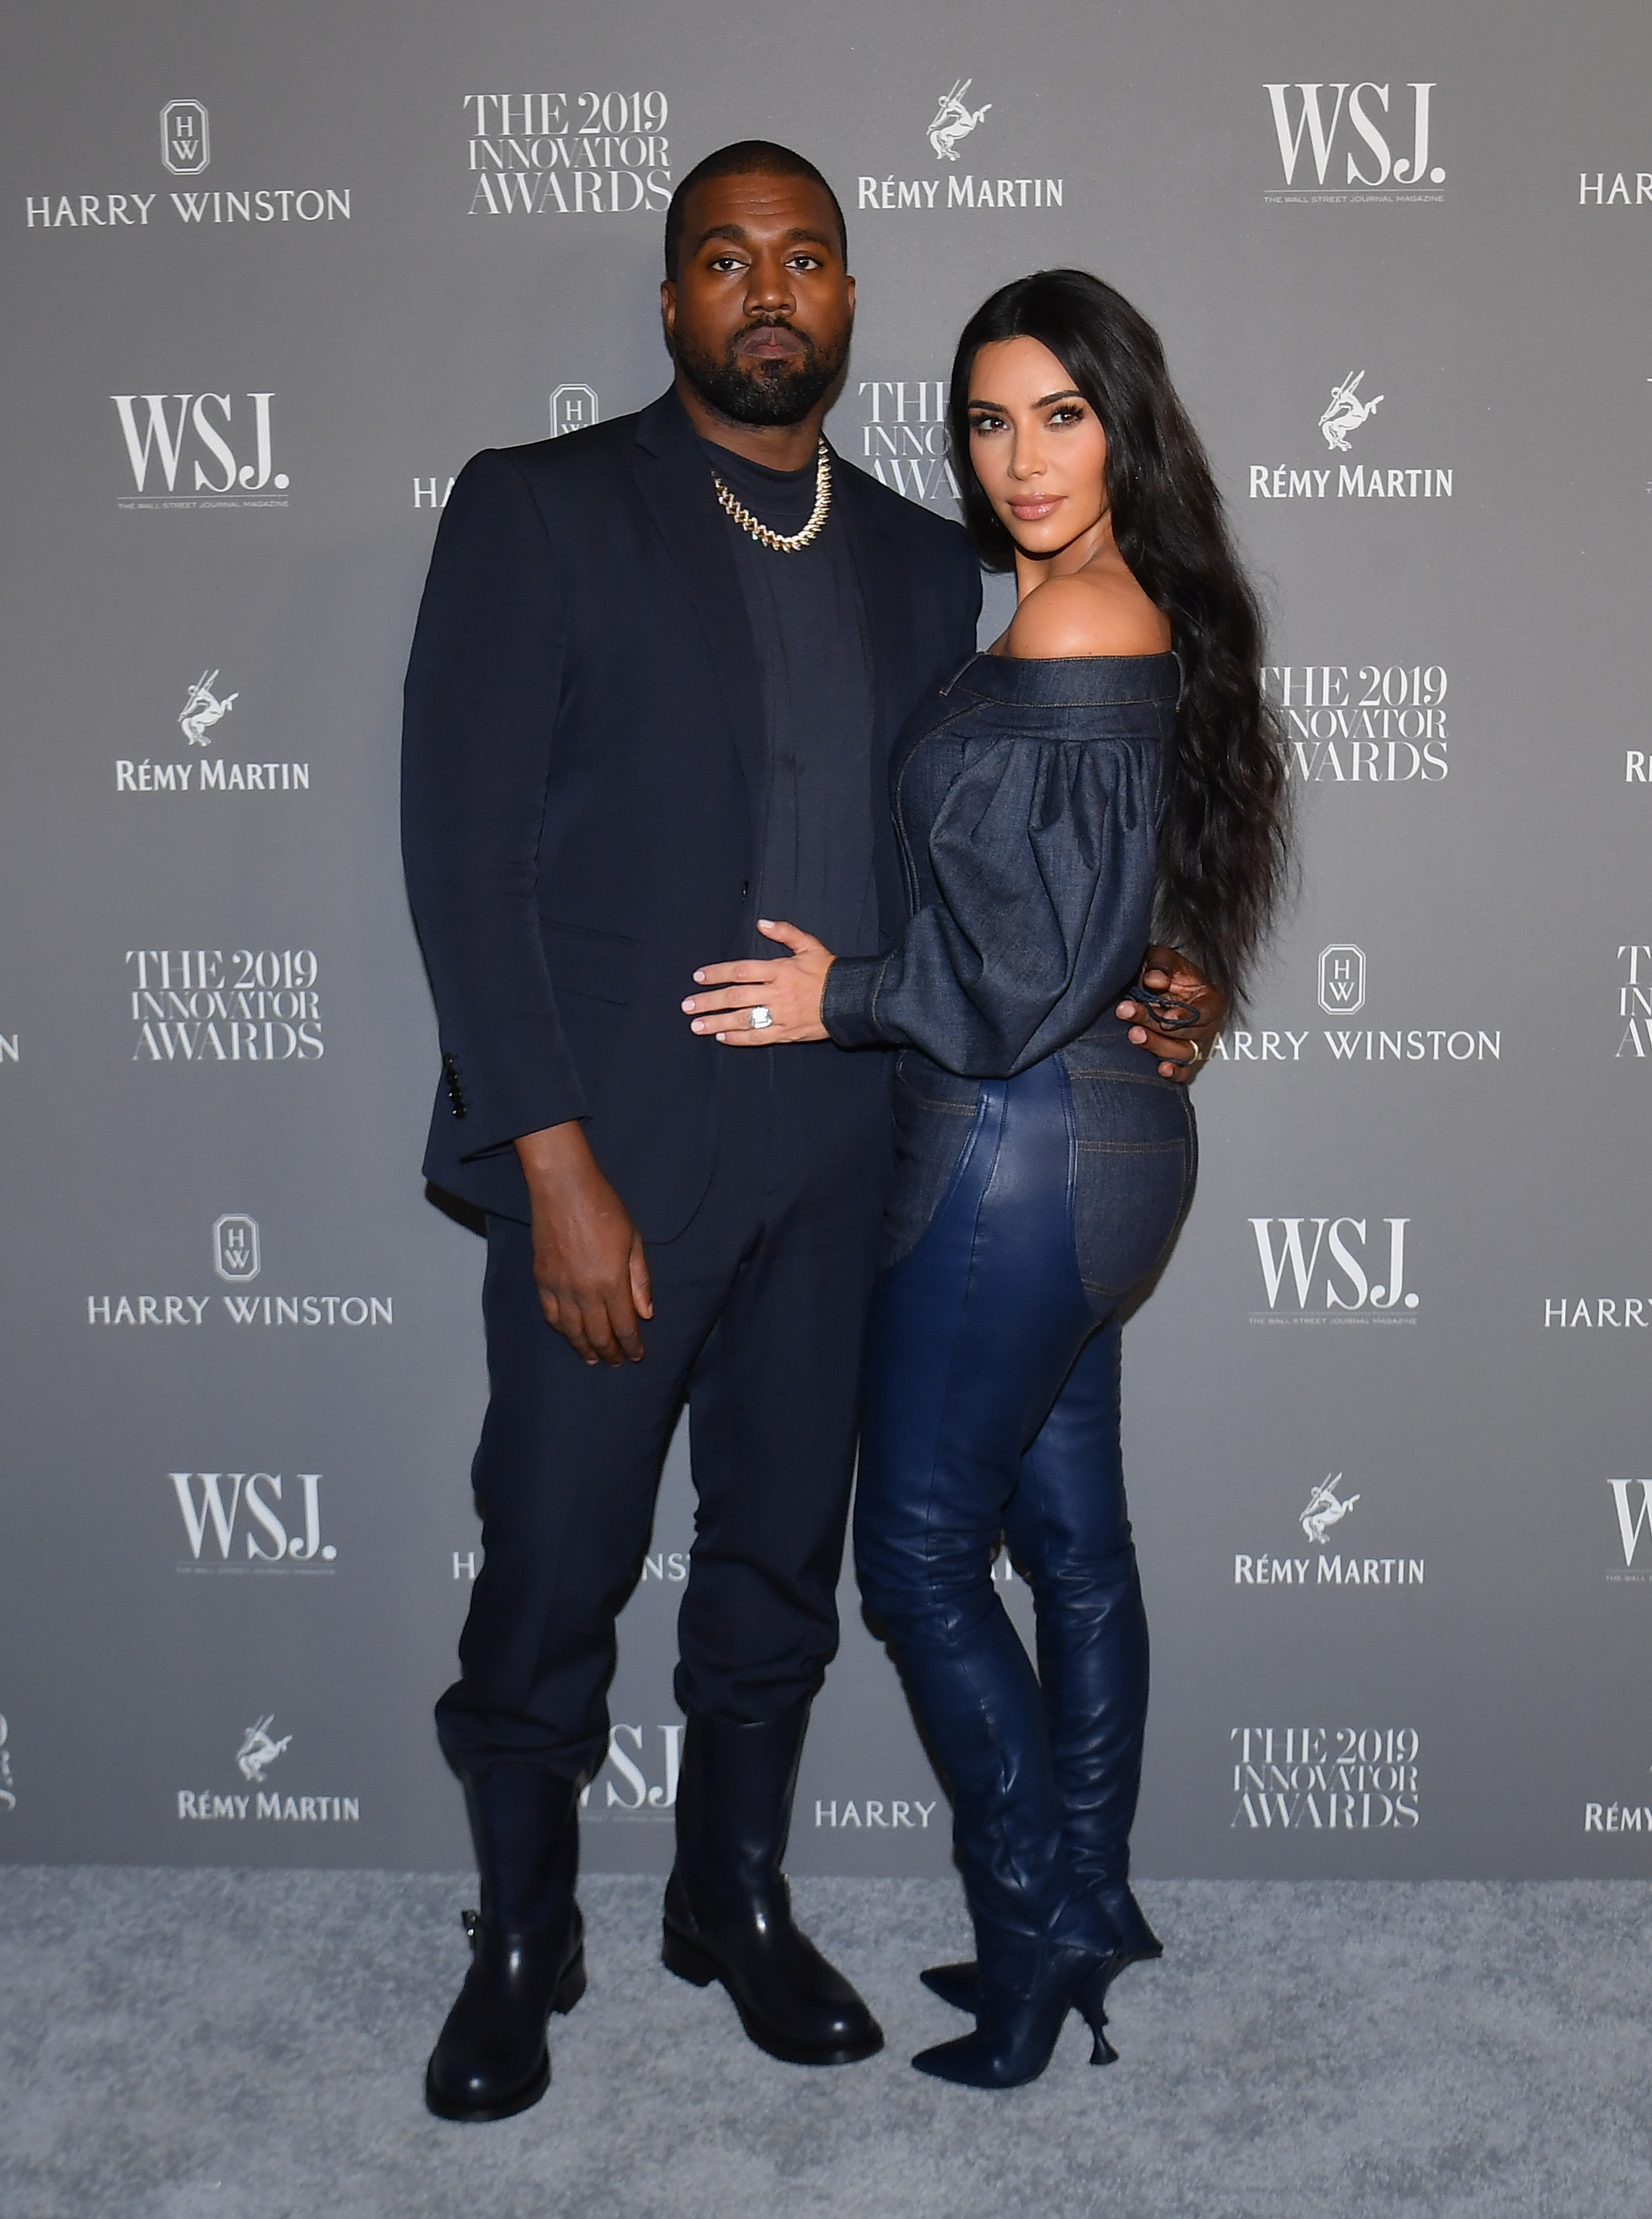 Kim has been distancing herself from her ex-husband, Kanye West, who created the shoe line, Yeezy